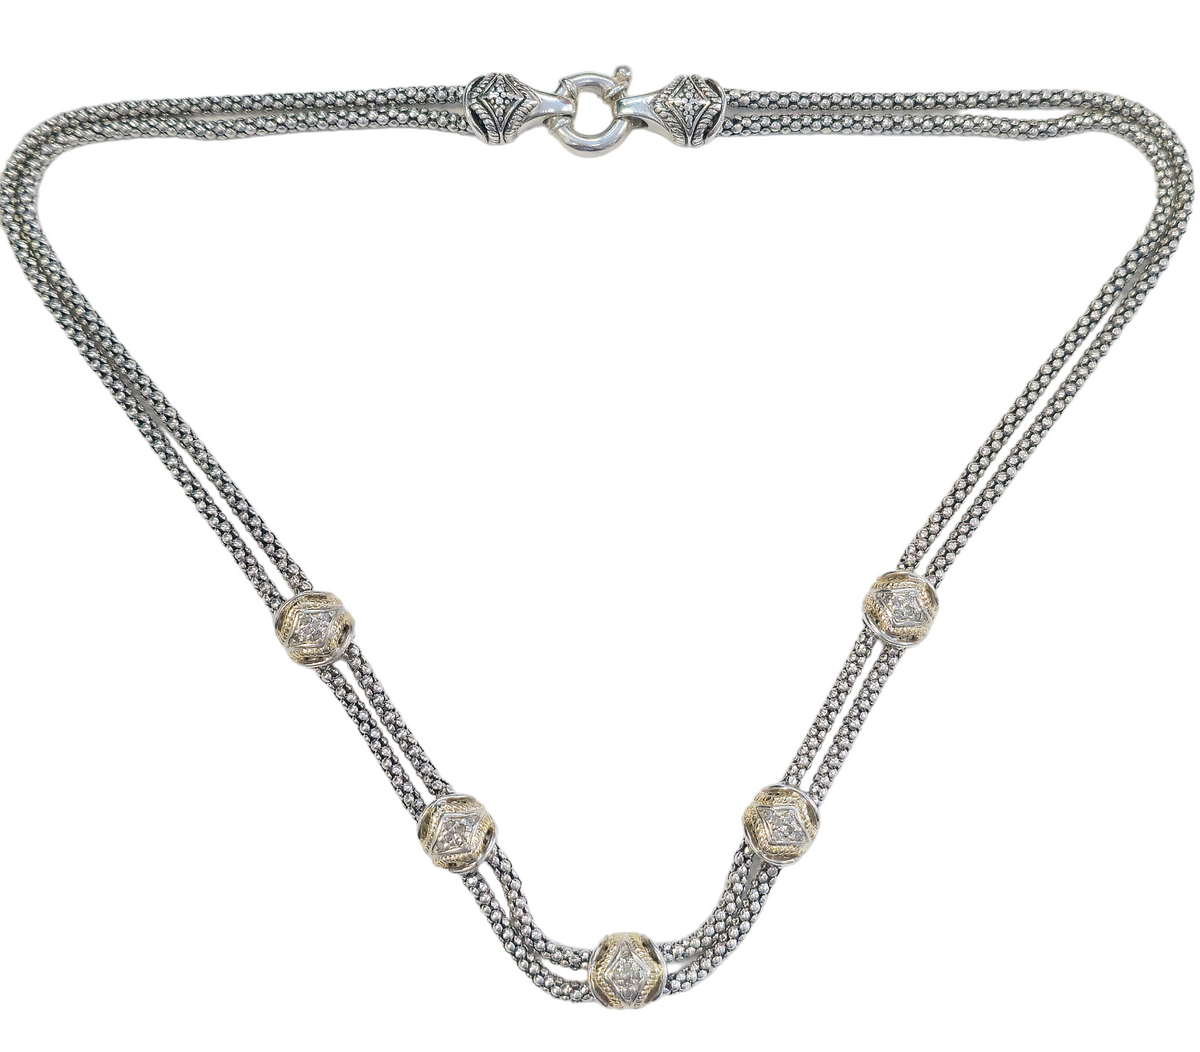 David Yurman double chain diamond station necklace in Silver and 14-karat yellow gold